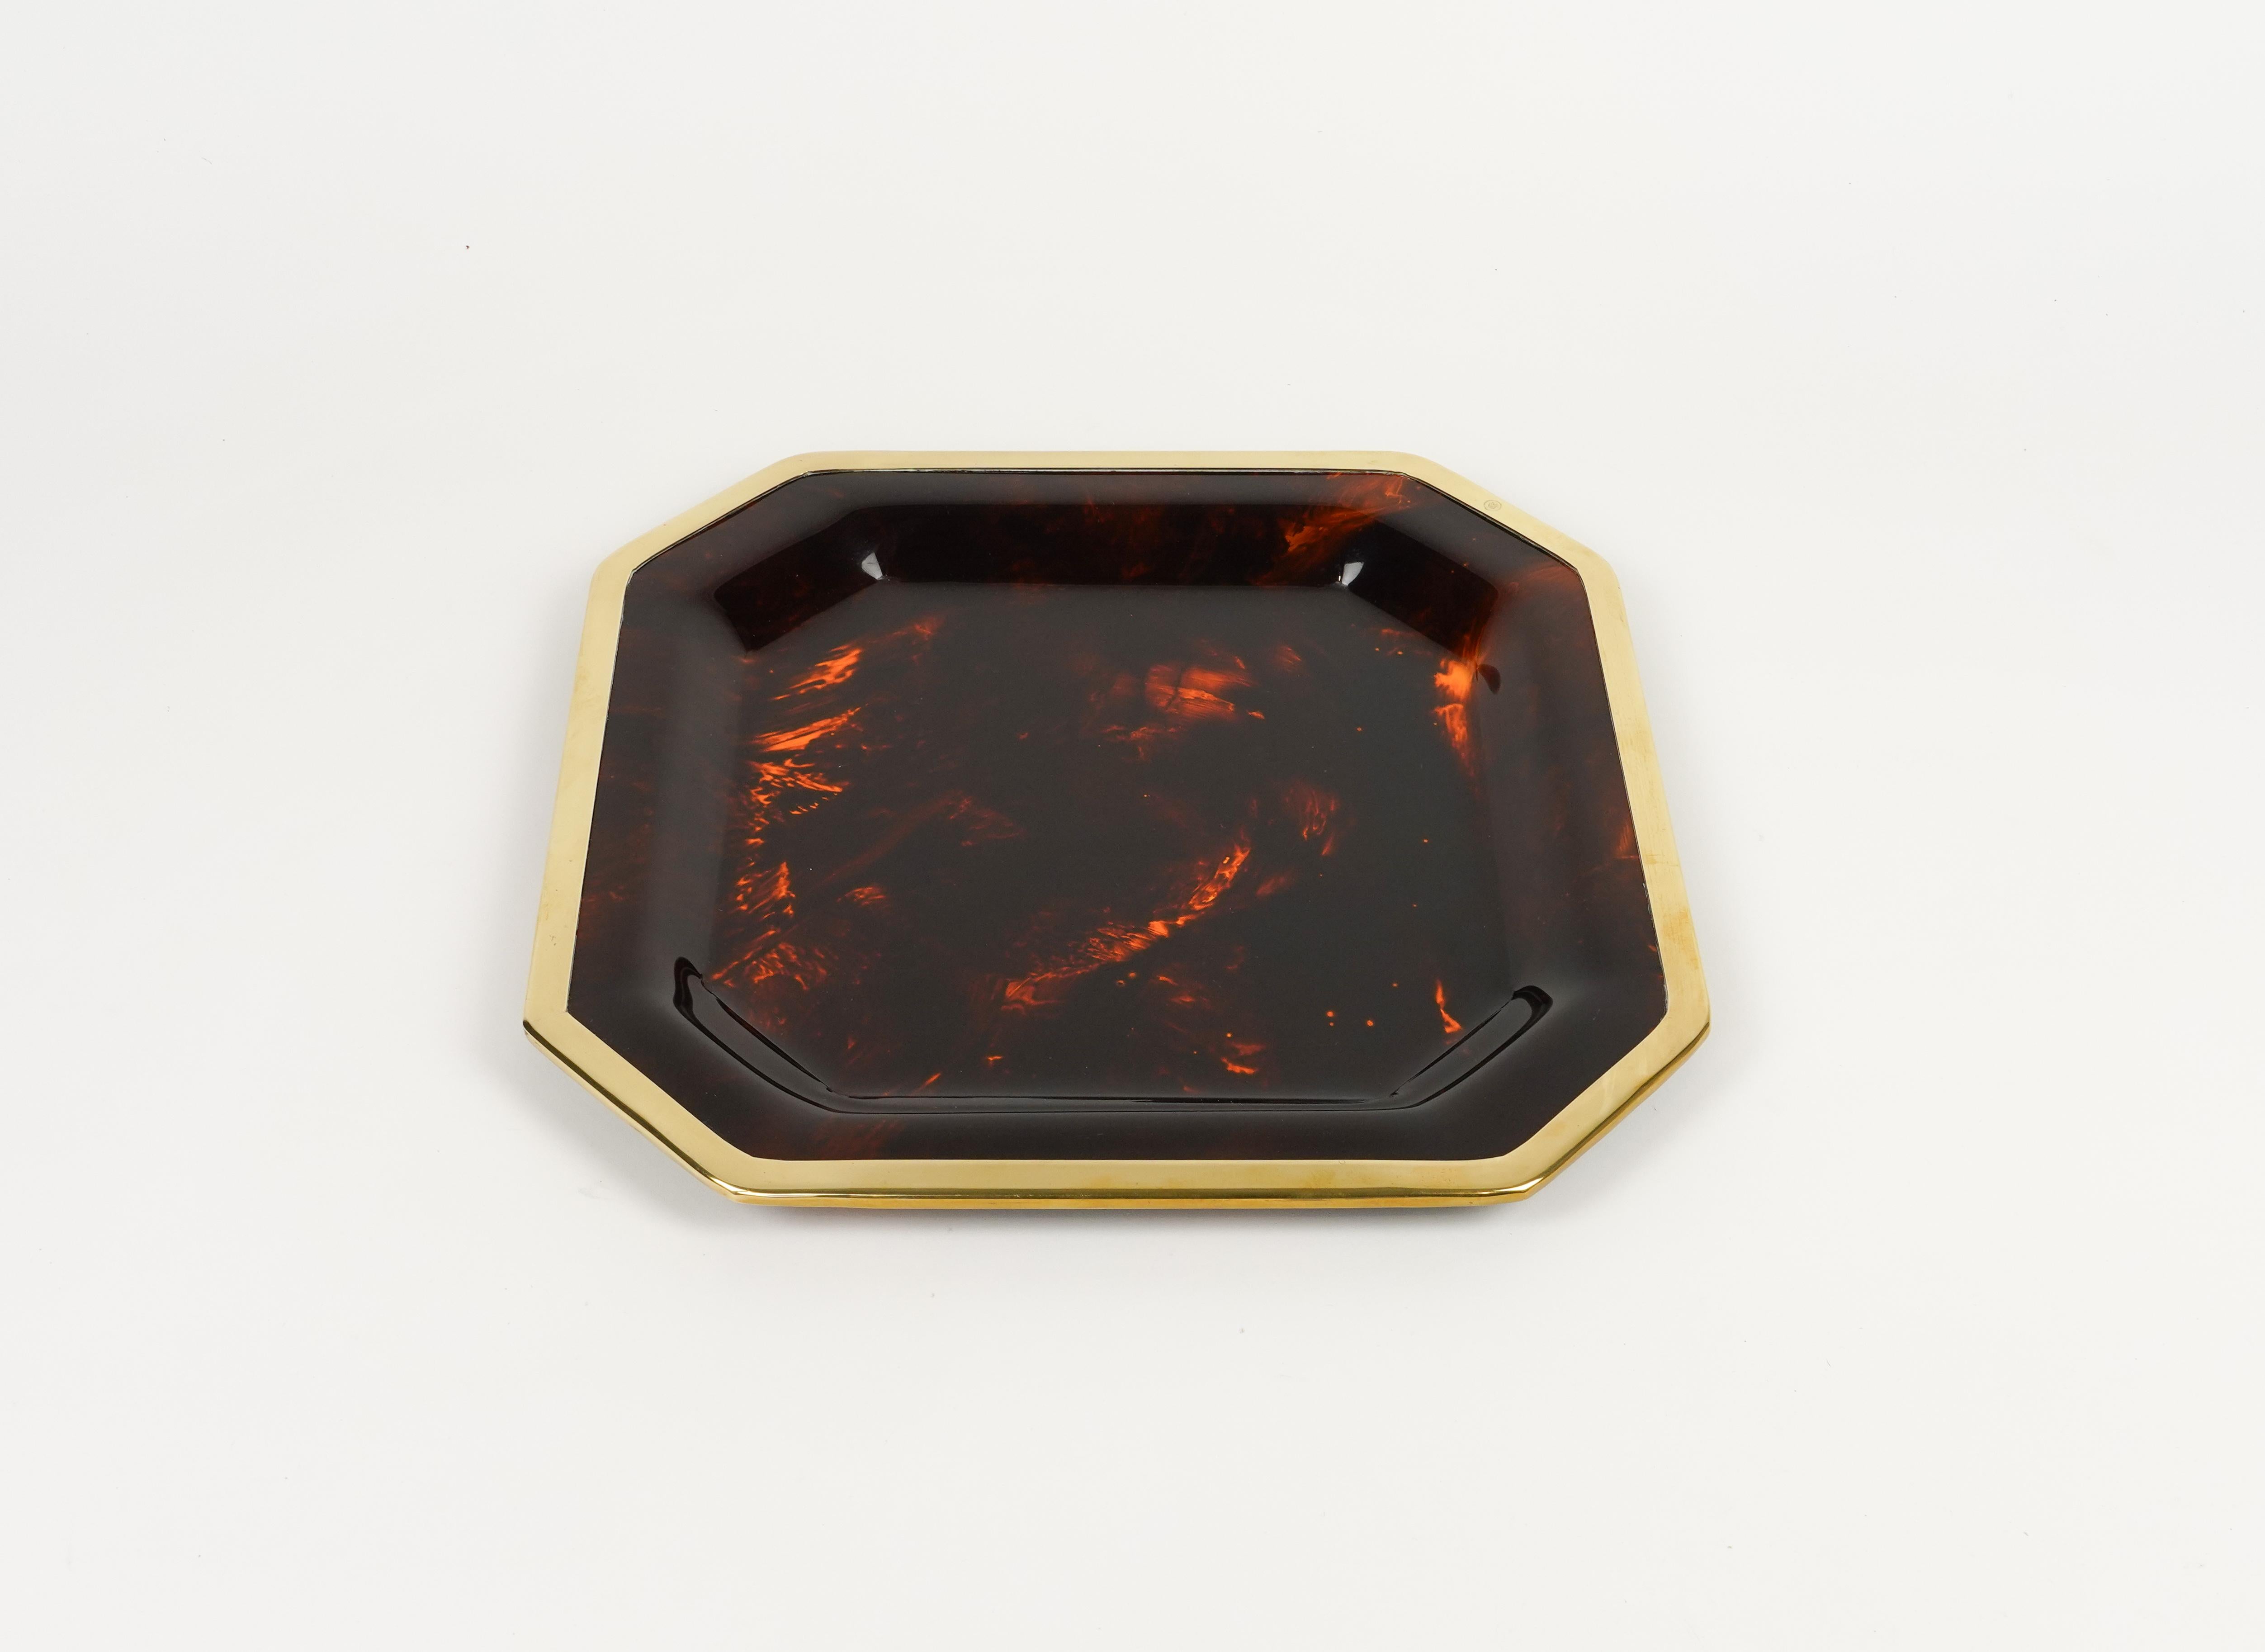 Midcentury amazing octagonal serving tray or vide-poche in tortoiseshell effect Lucite and brass borders in the style of Christian Dior.  

Made in Italy in the 1970s.  

Great accessory for any modern interior.